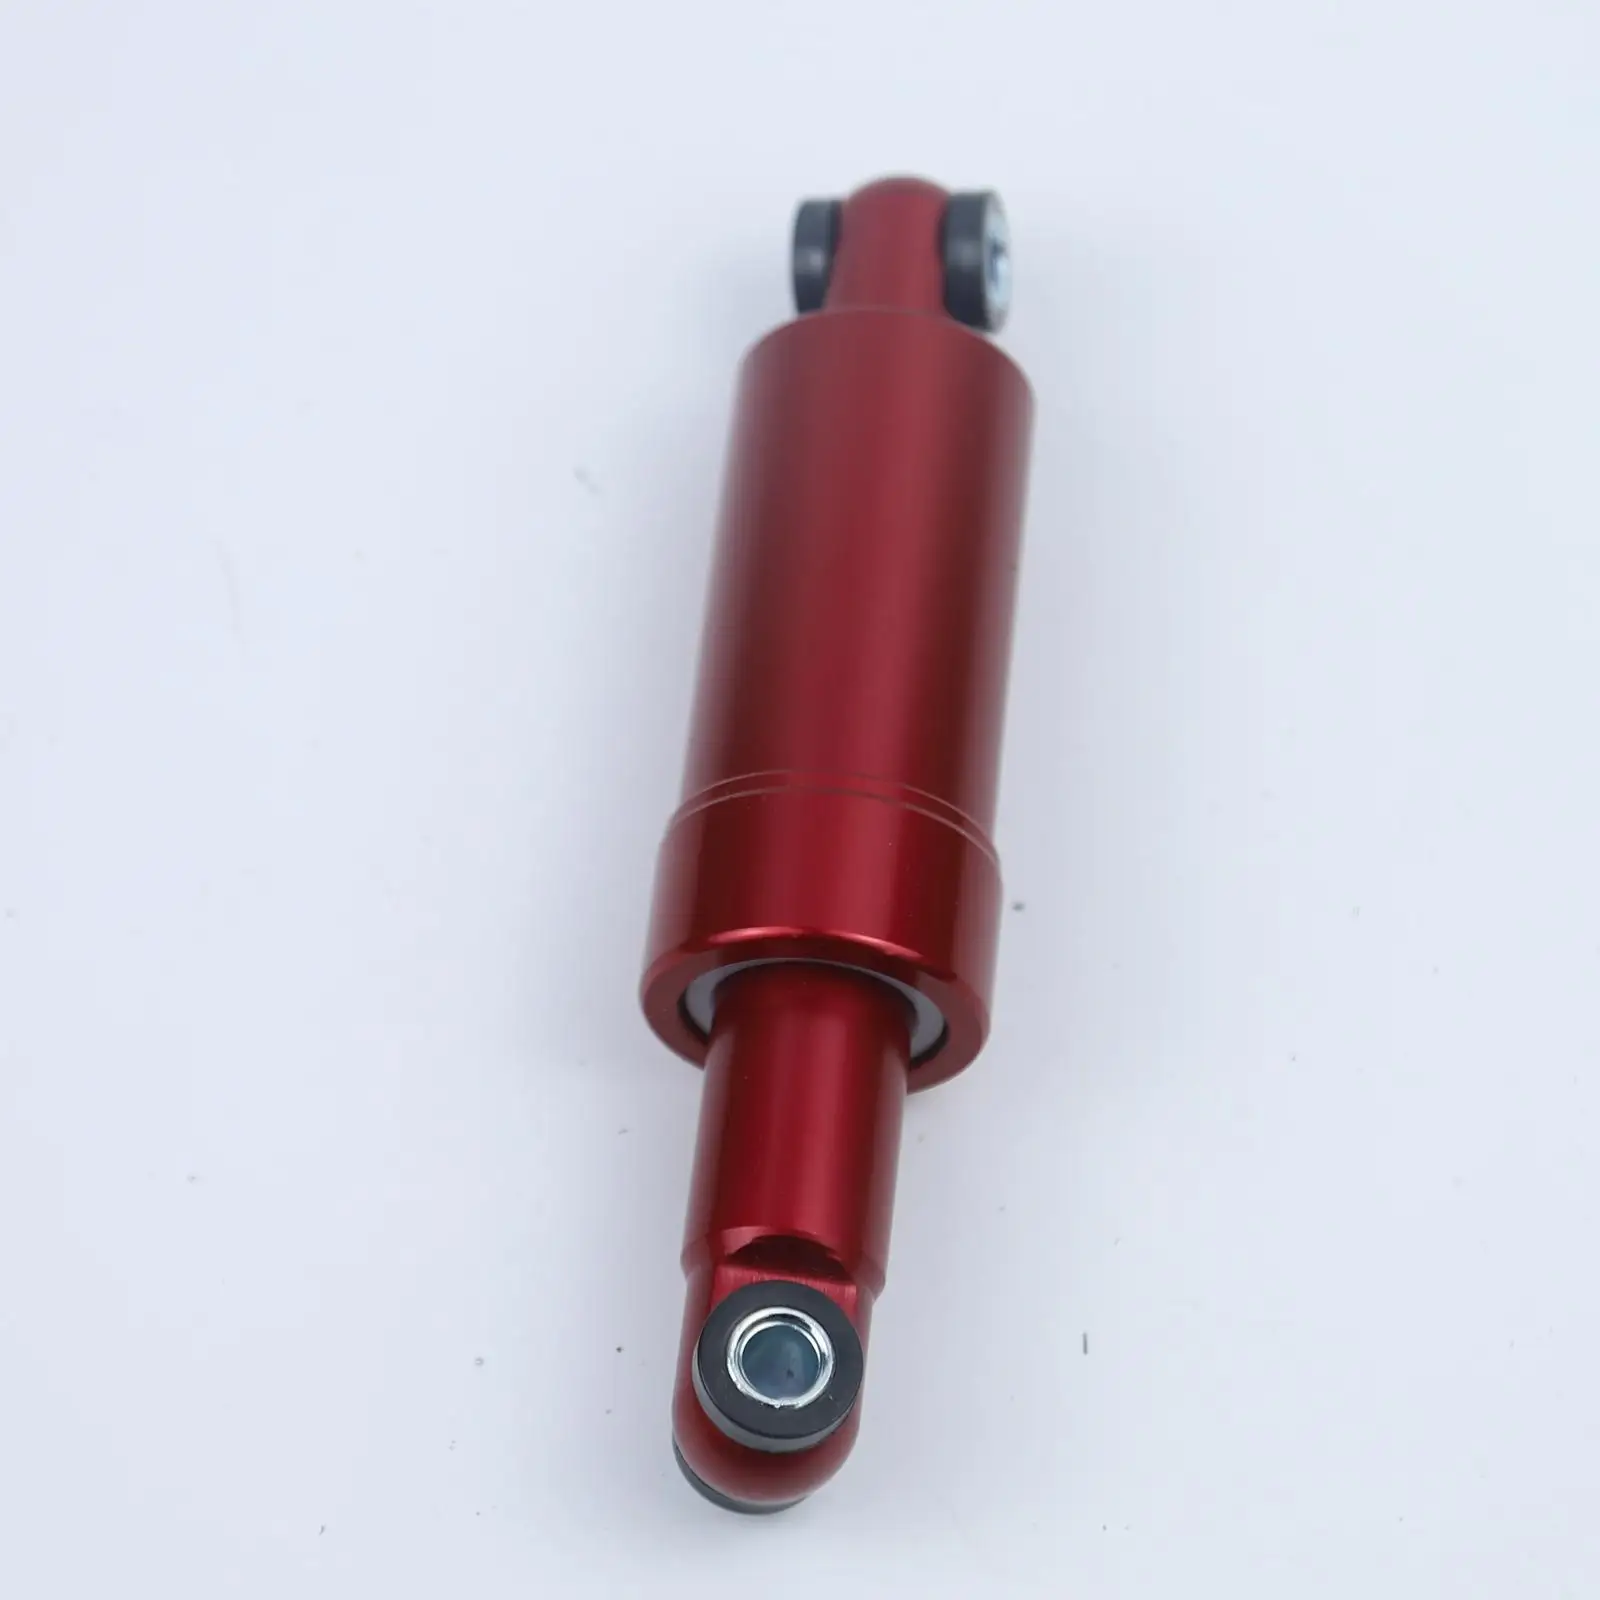 150mm Rear Suspension Shock Absorber Replace Parts for Electric Scooter Mini